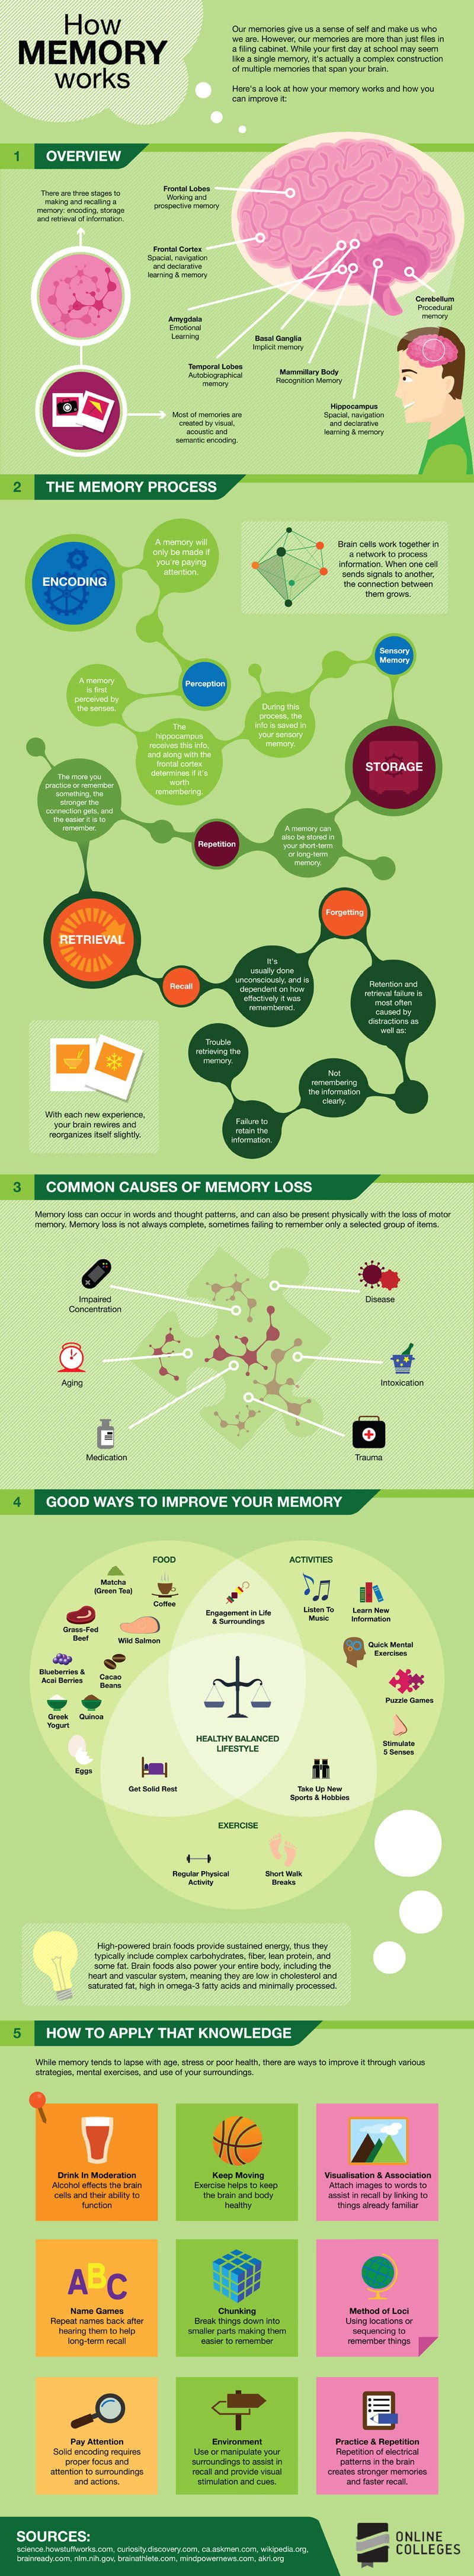 How Memory Works Infographic